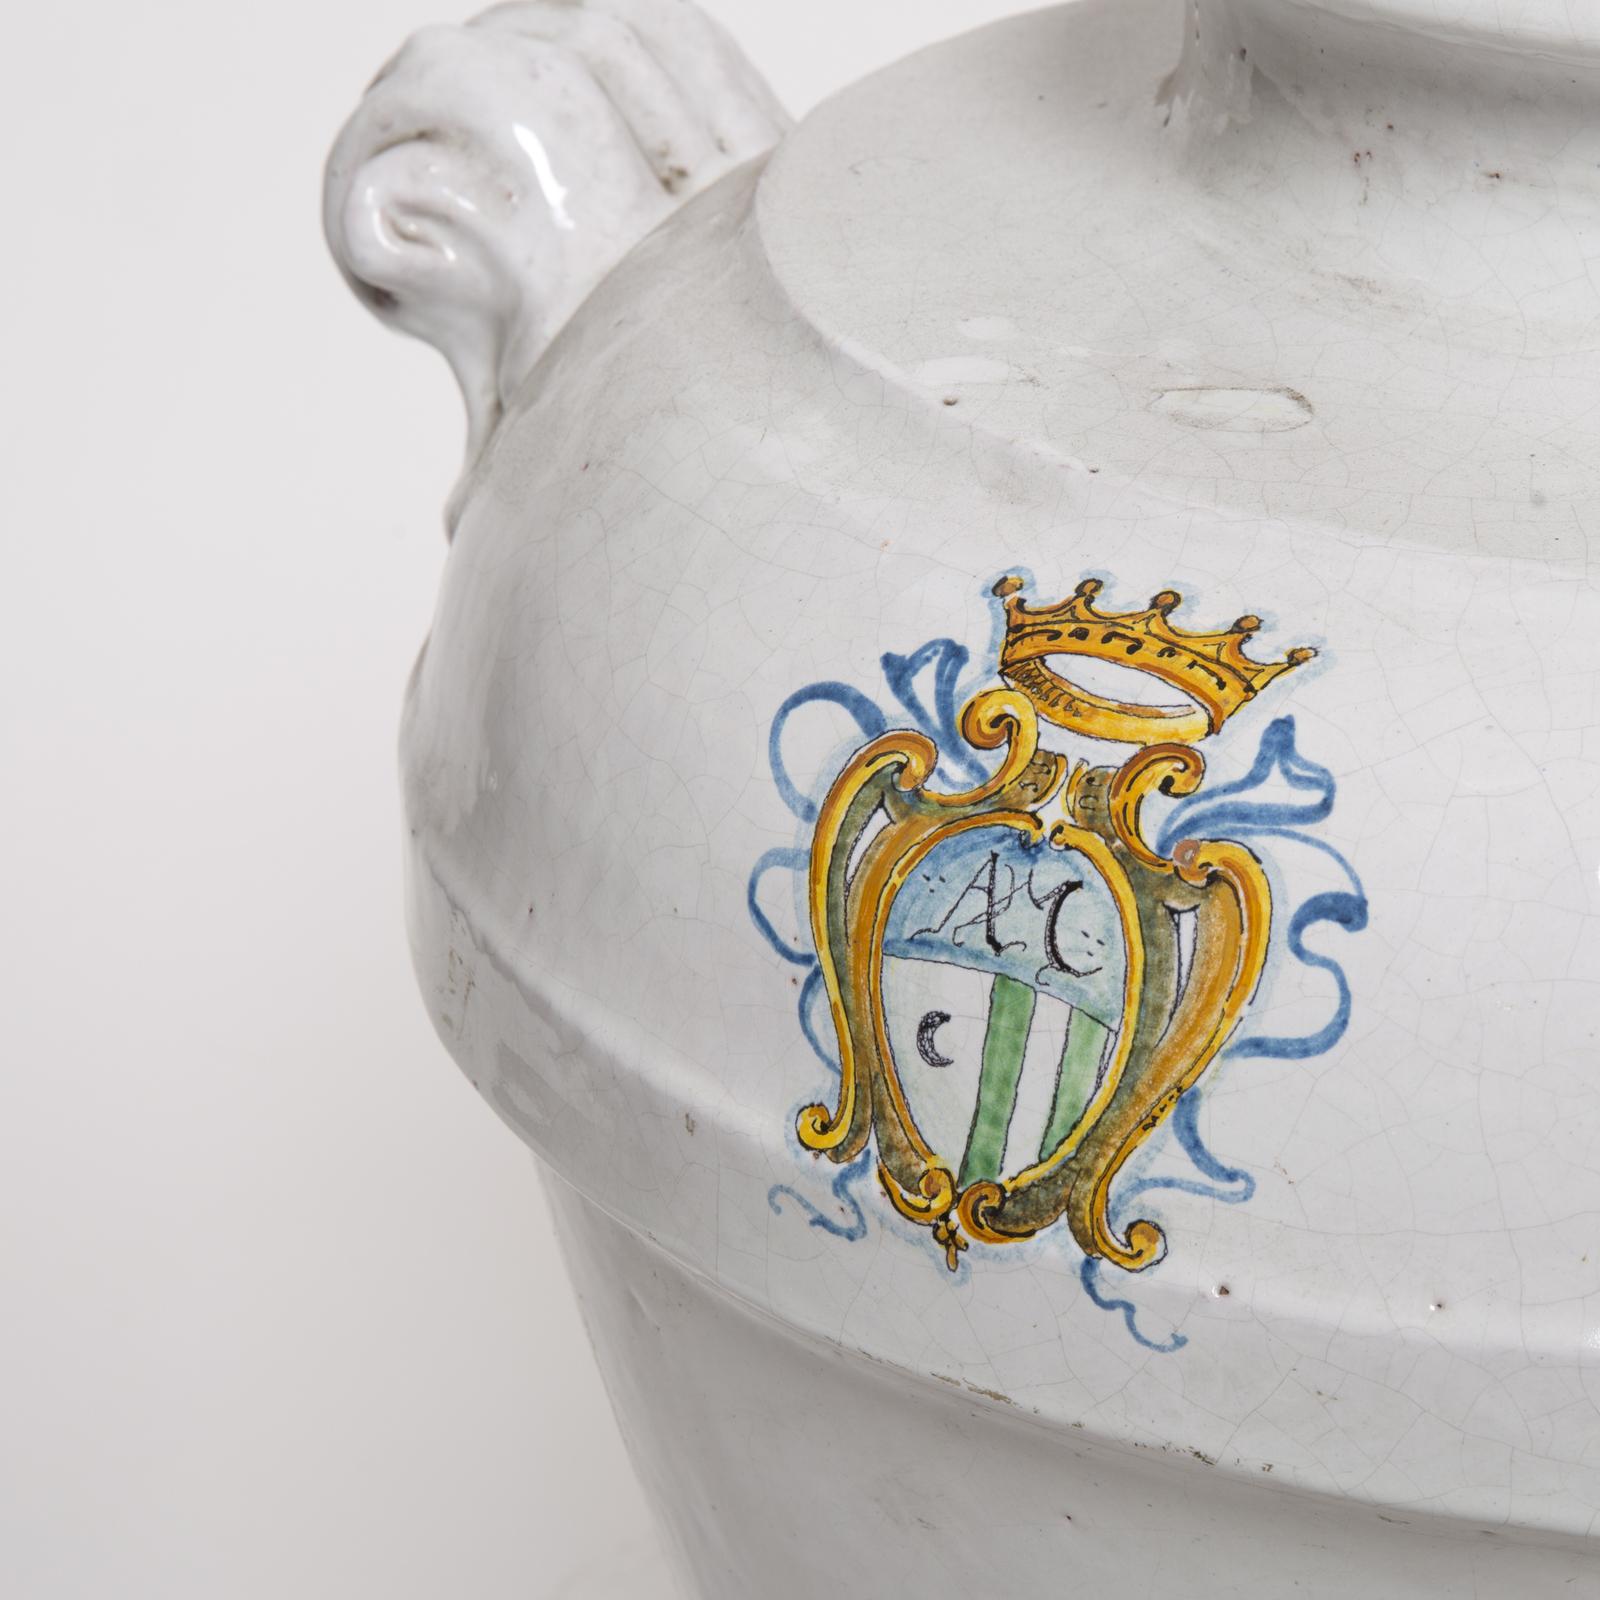 Dainty ceramic jar in the characteristic style of Faenza, one of the major ceramic centers in Italy. The rather large vase is entirely handcrafted by the ceramic artists of Manetti e Masini in Florence. The decoration includes the hand-painted crest